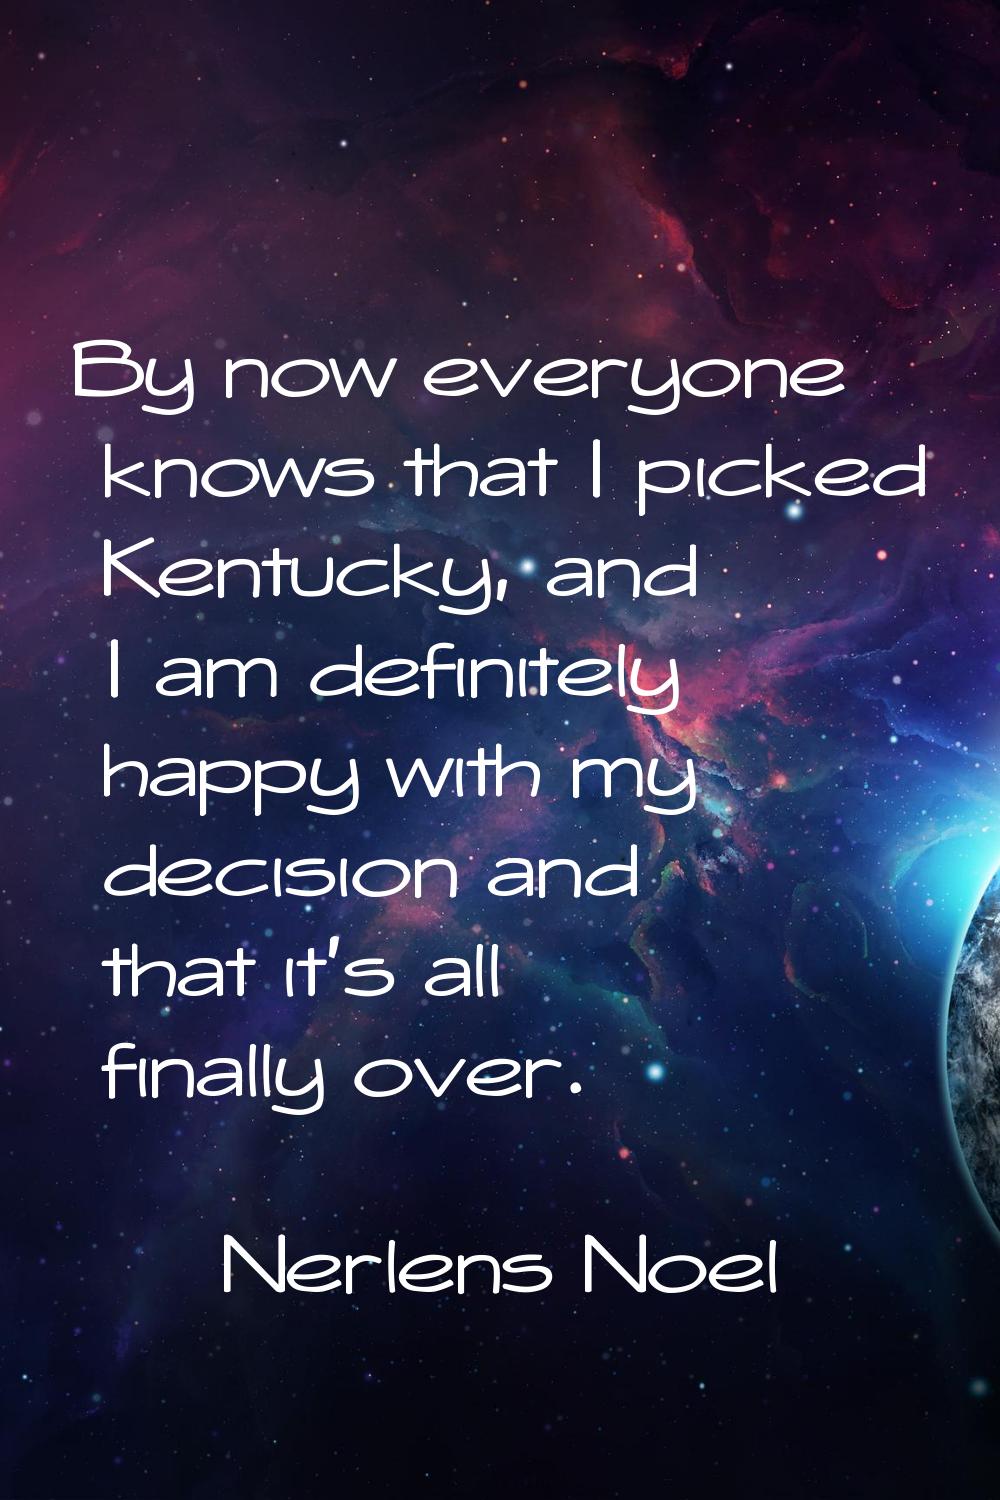 By now everyone knows that I picked Kentucky, and I am definitely happy with my decision and that i